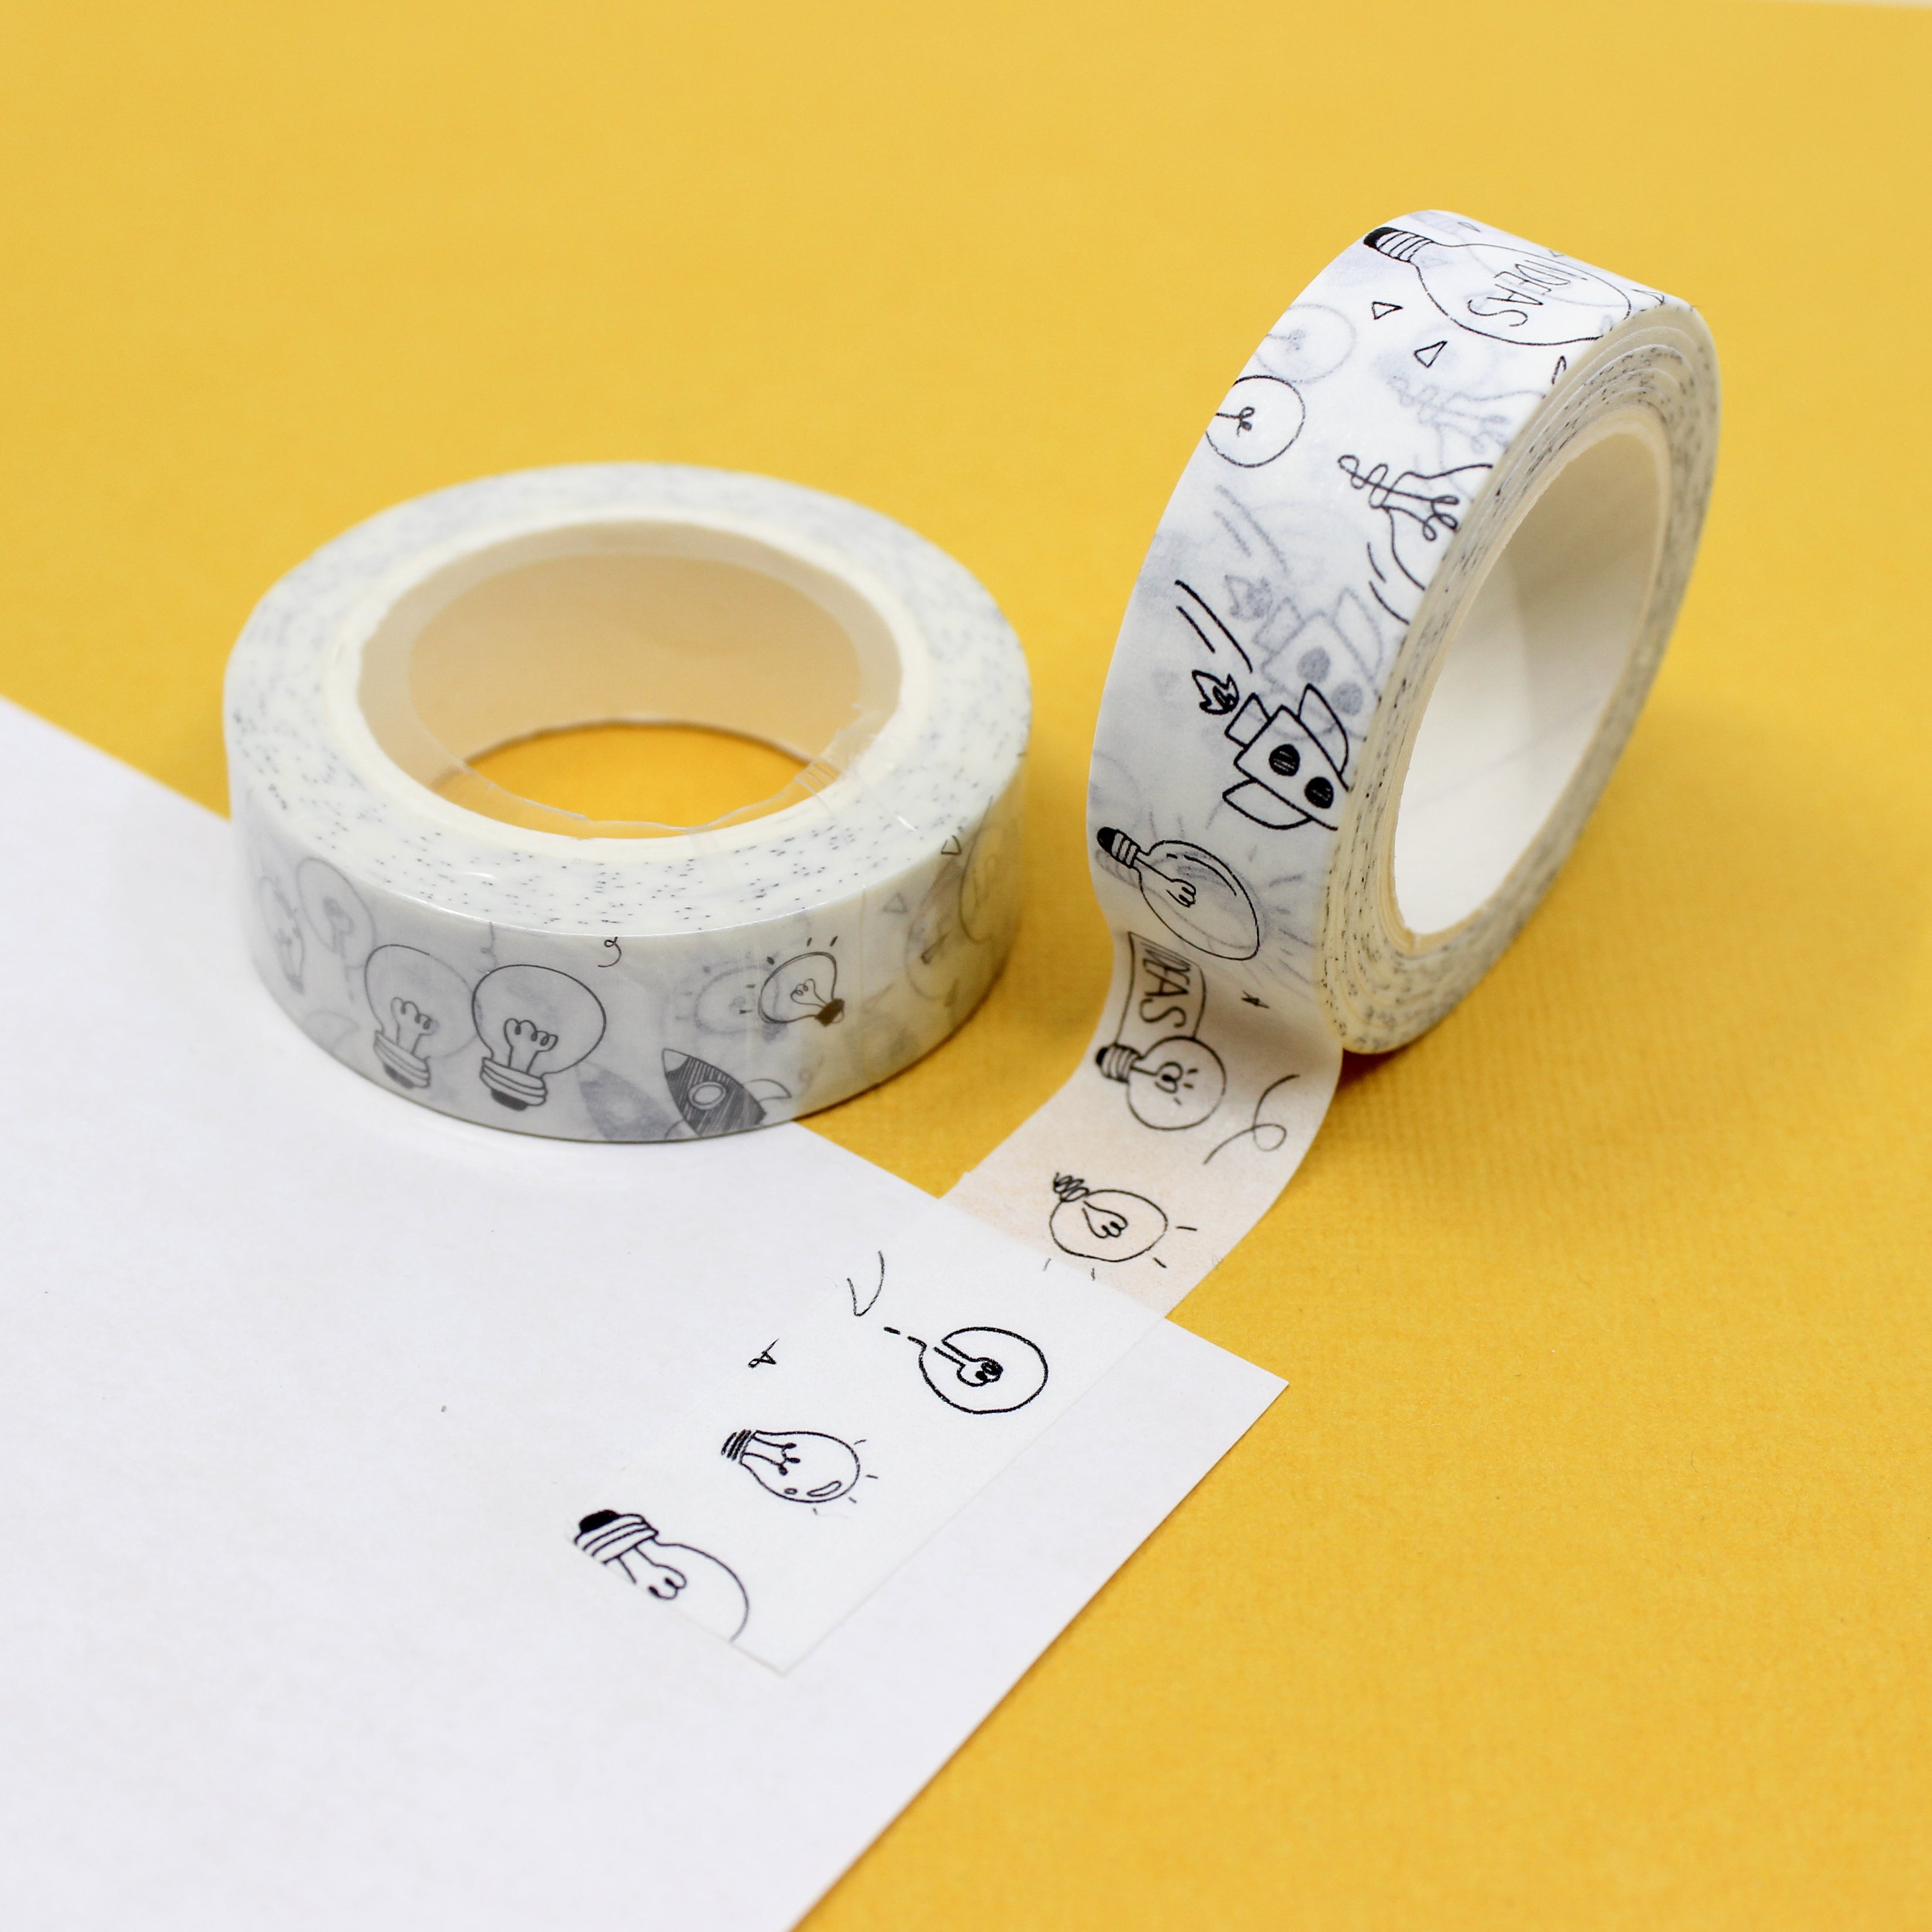 Illuminate your crafts with our charming light bulb washi tape, featuring a whimsical design of glowing light bulbs for a touch of creativity and inspiration. This tape is sold at BBB Supplies Craft Shop.